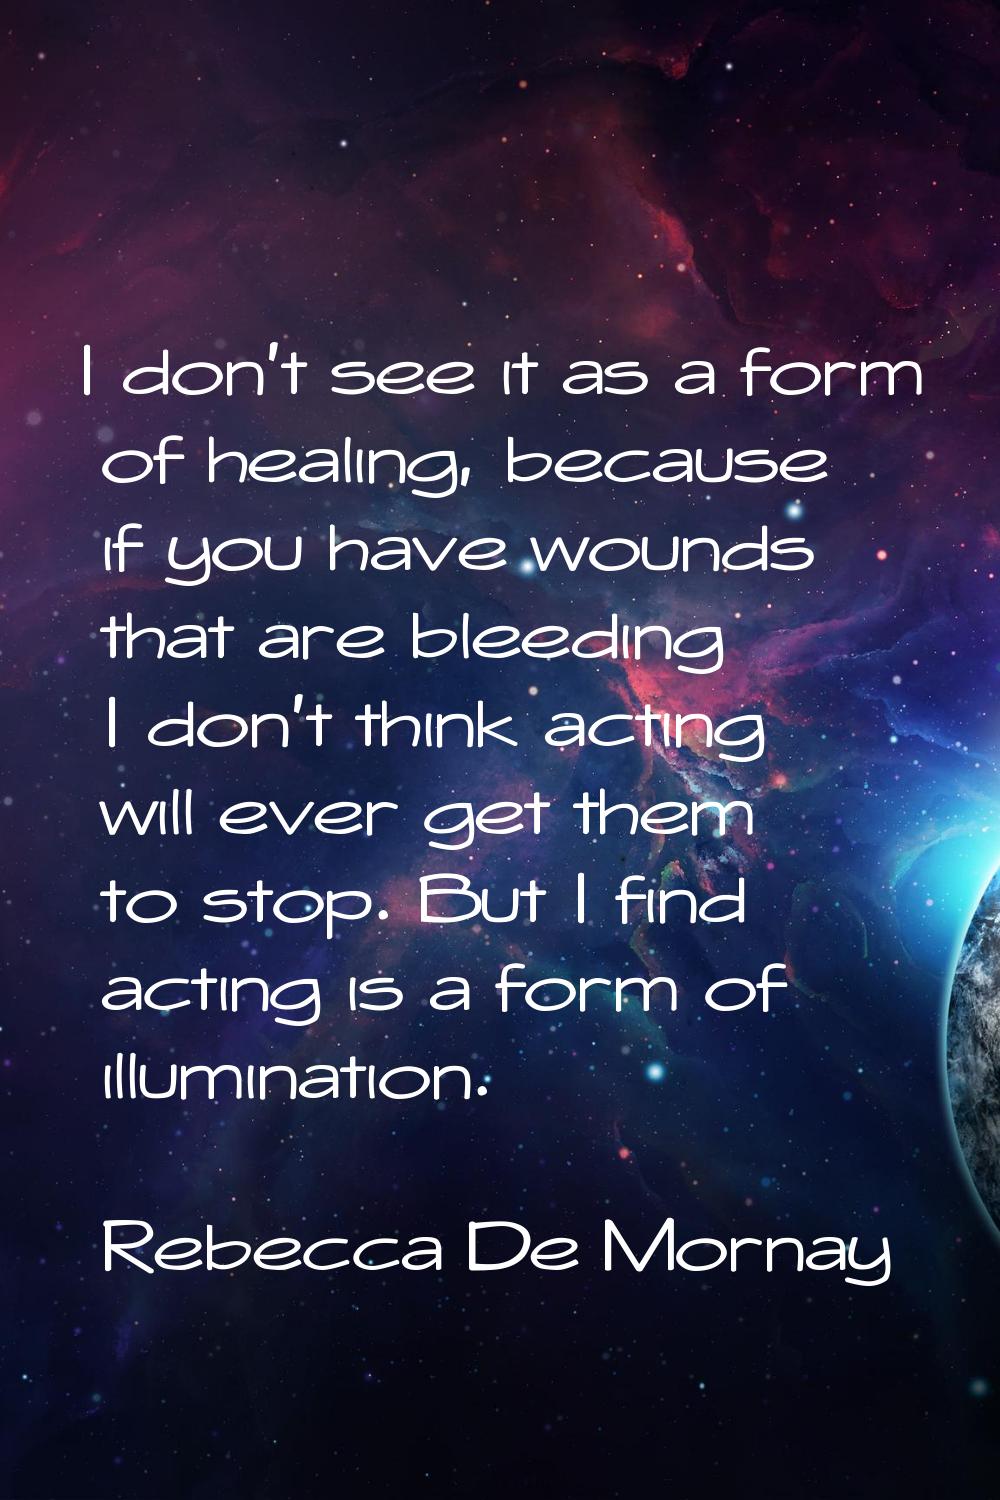 I don't see it as a form of healing, because if you have wounds that are bleeding I don't think act